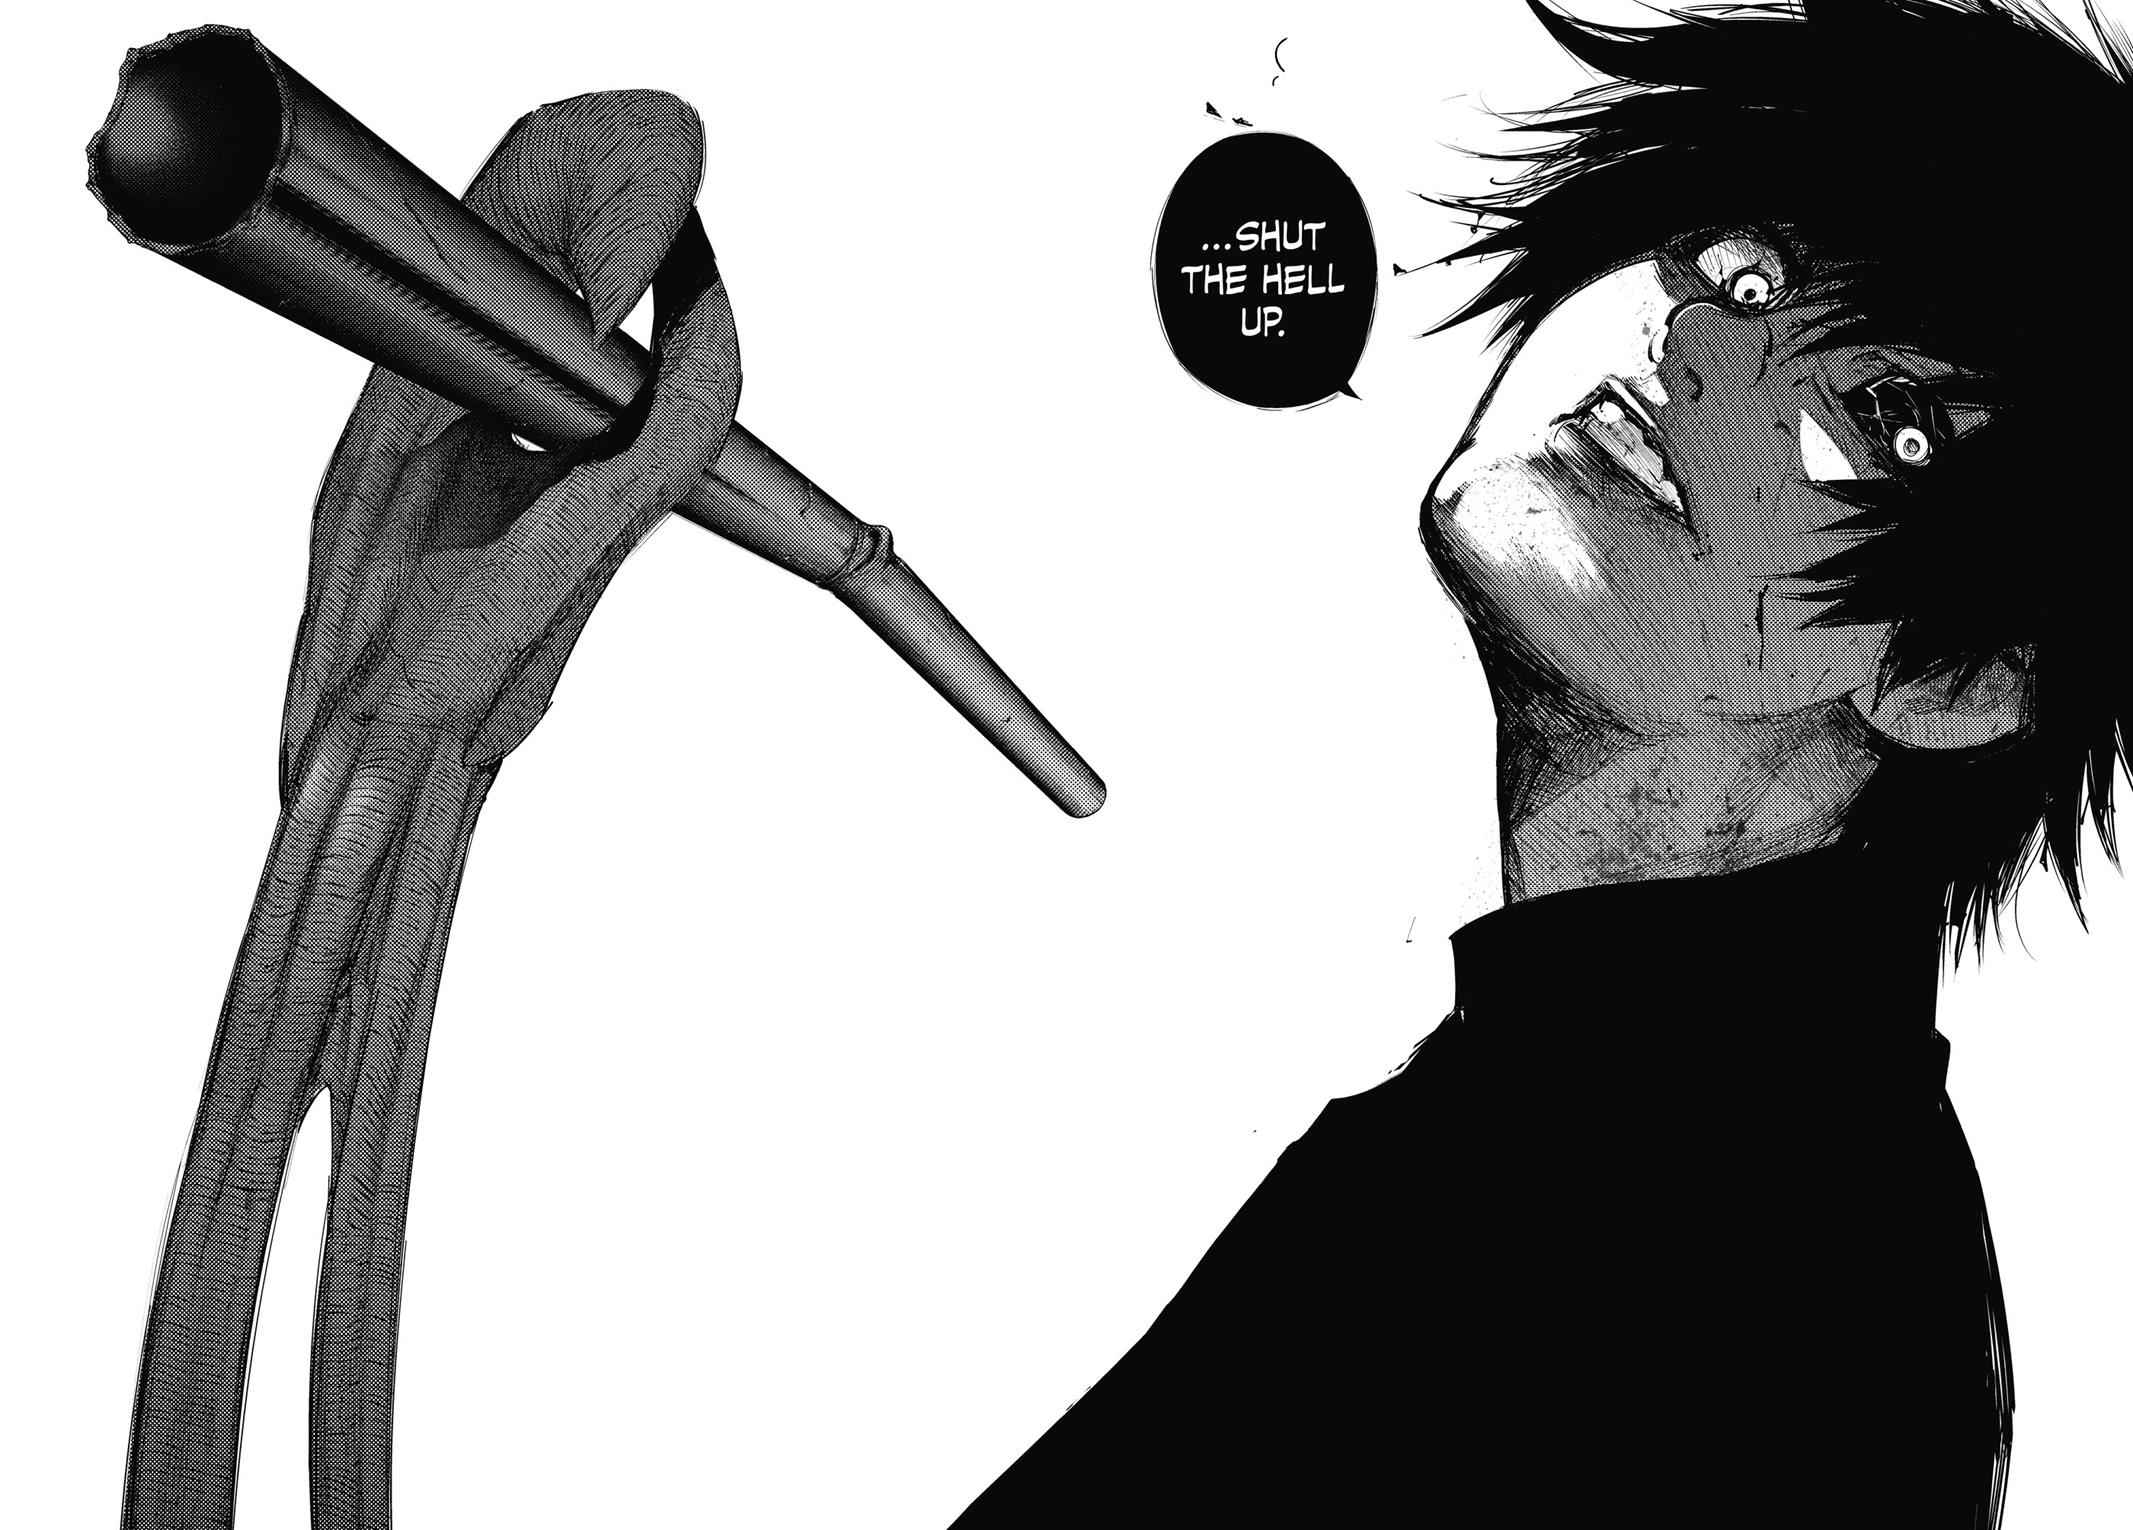 Thoughts on Tokyo Ghoul:re - Manga Review (Spoilers) — Jackson P. Brown